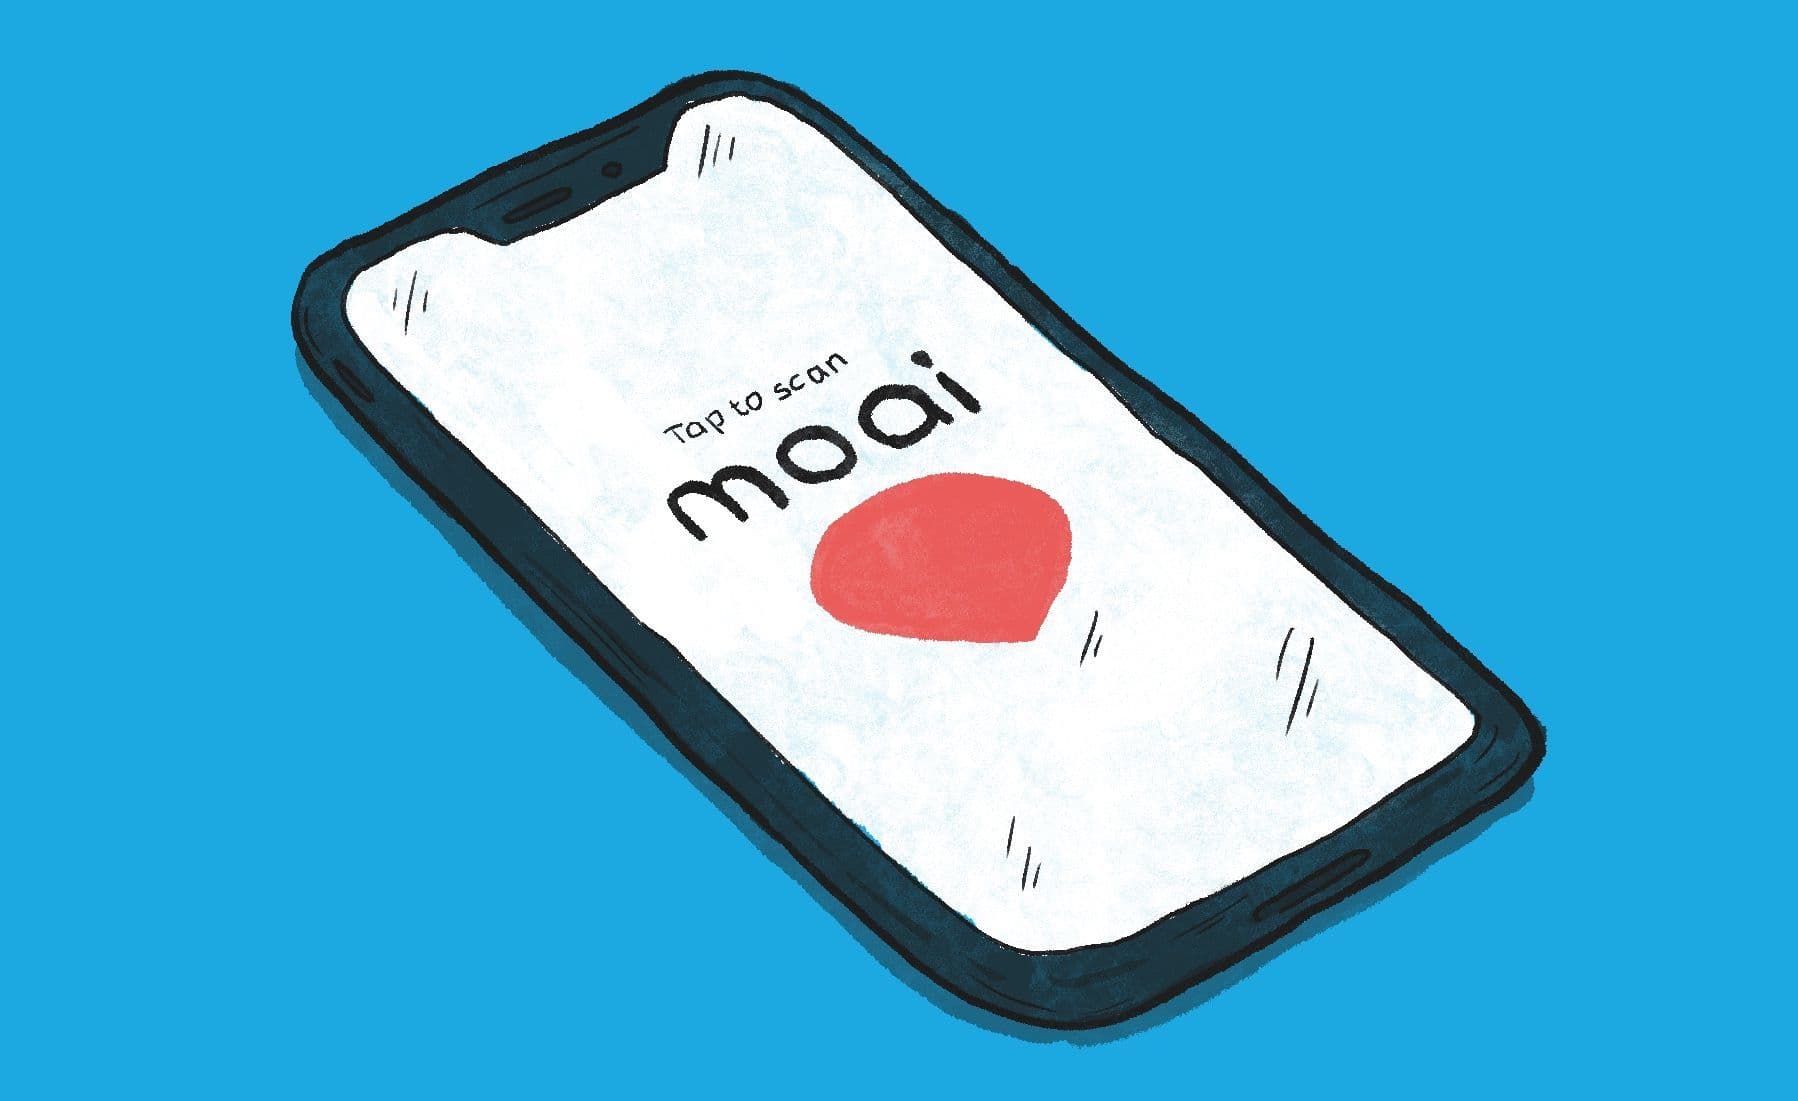 An introduction to the Moai app